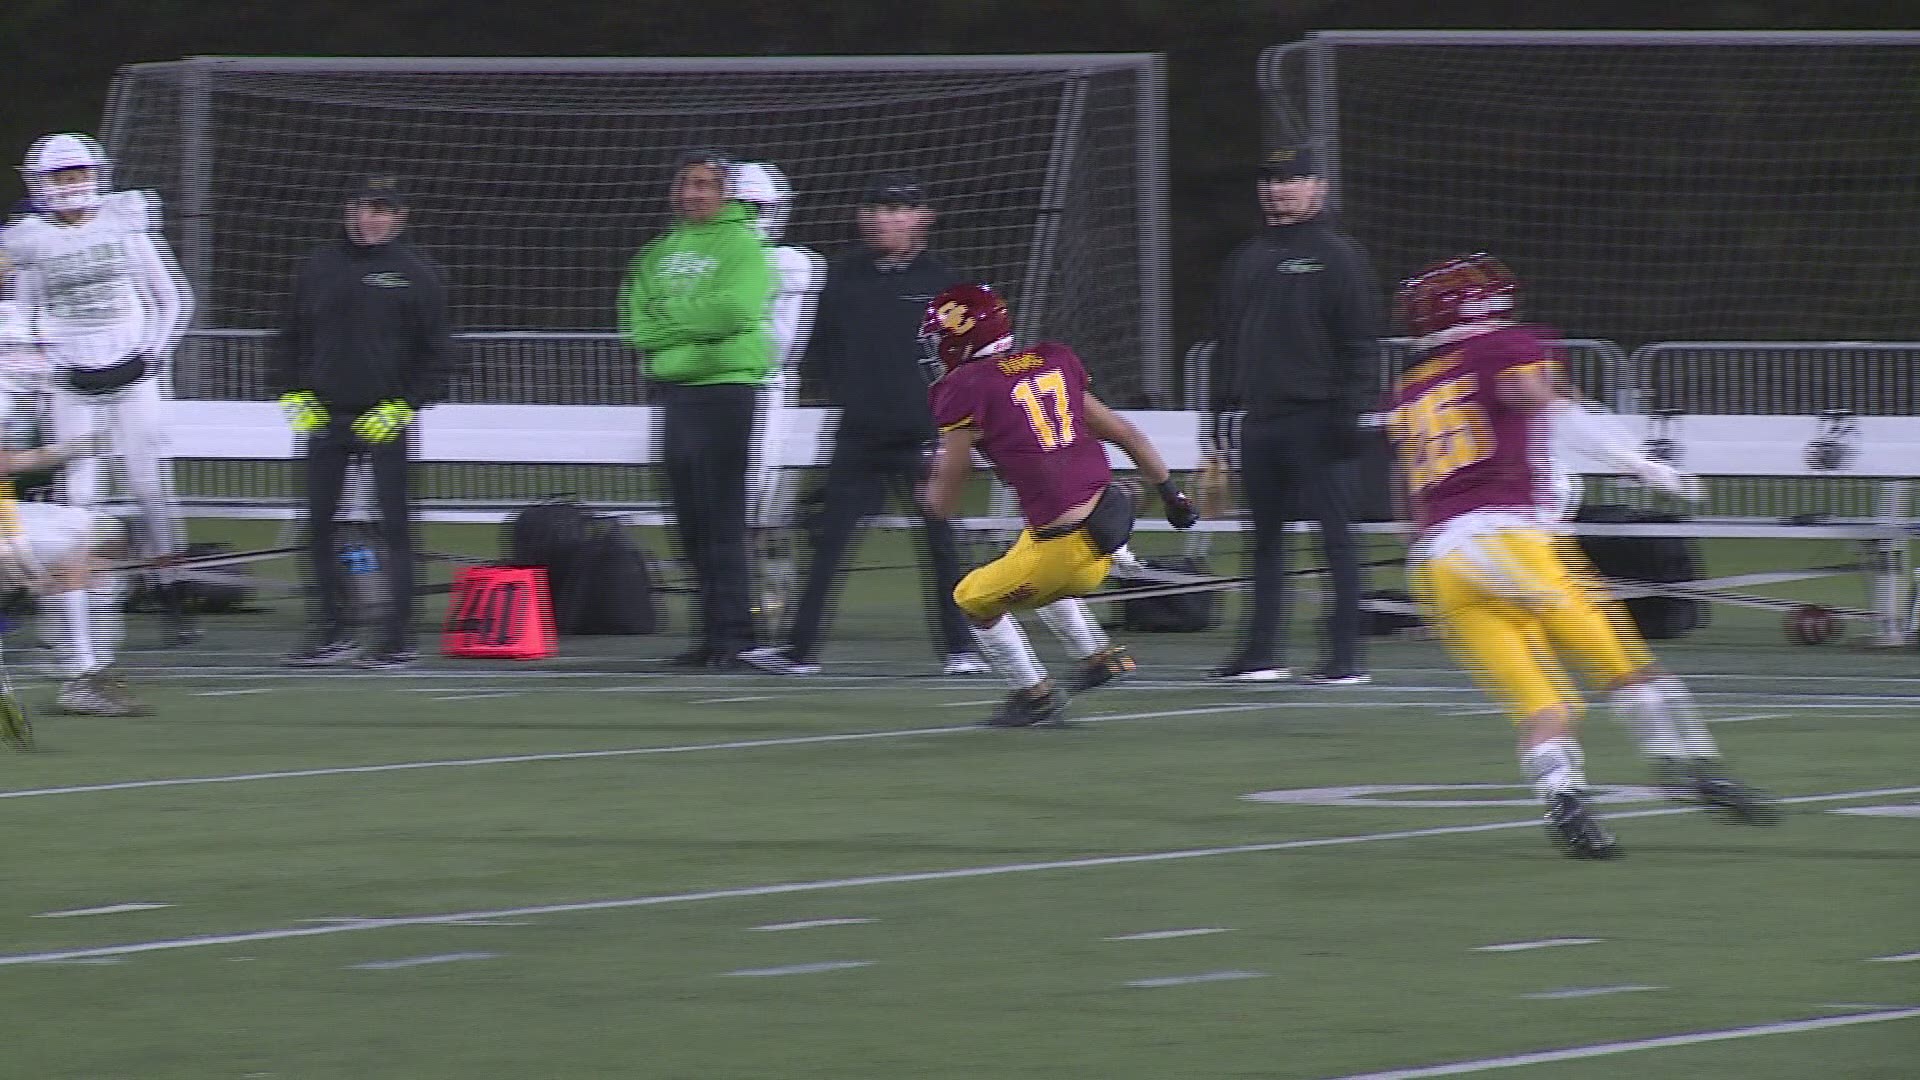 Highlights of Central Catholic's 42-35 win over West Linn in the 6A quarterfinals.